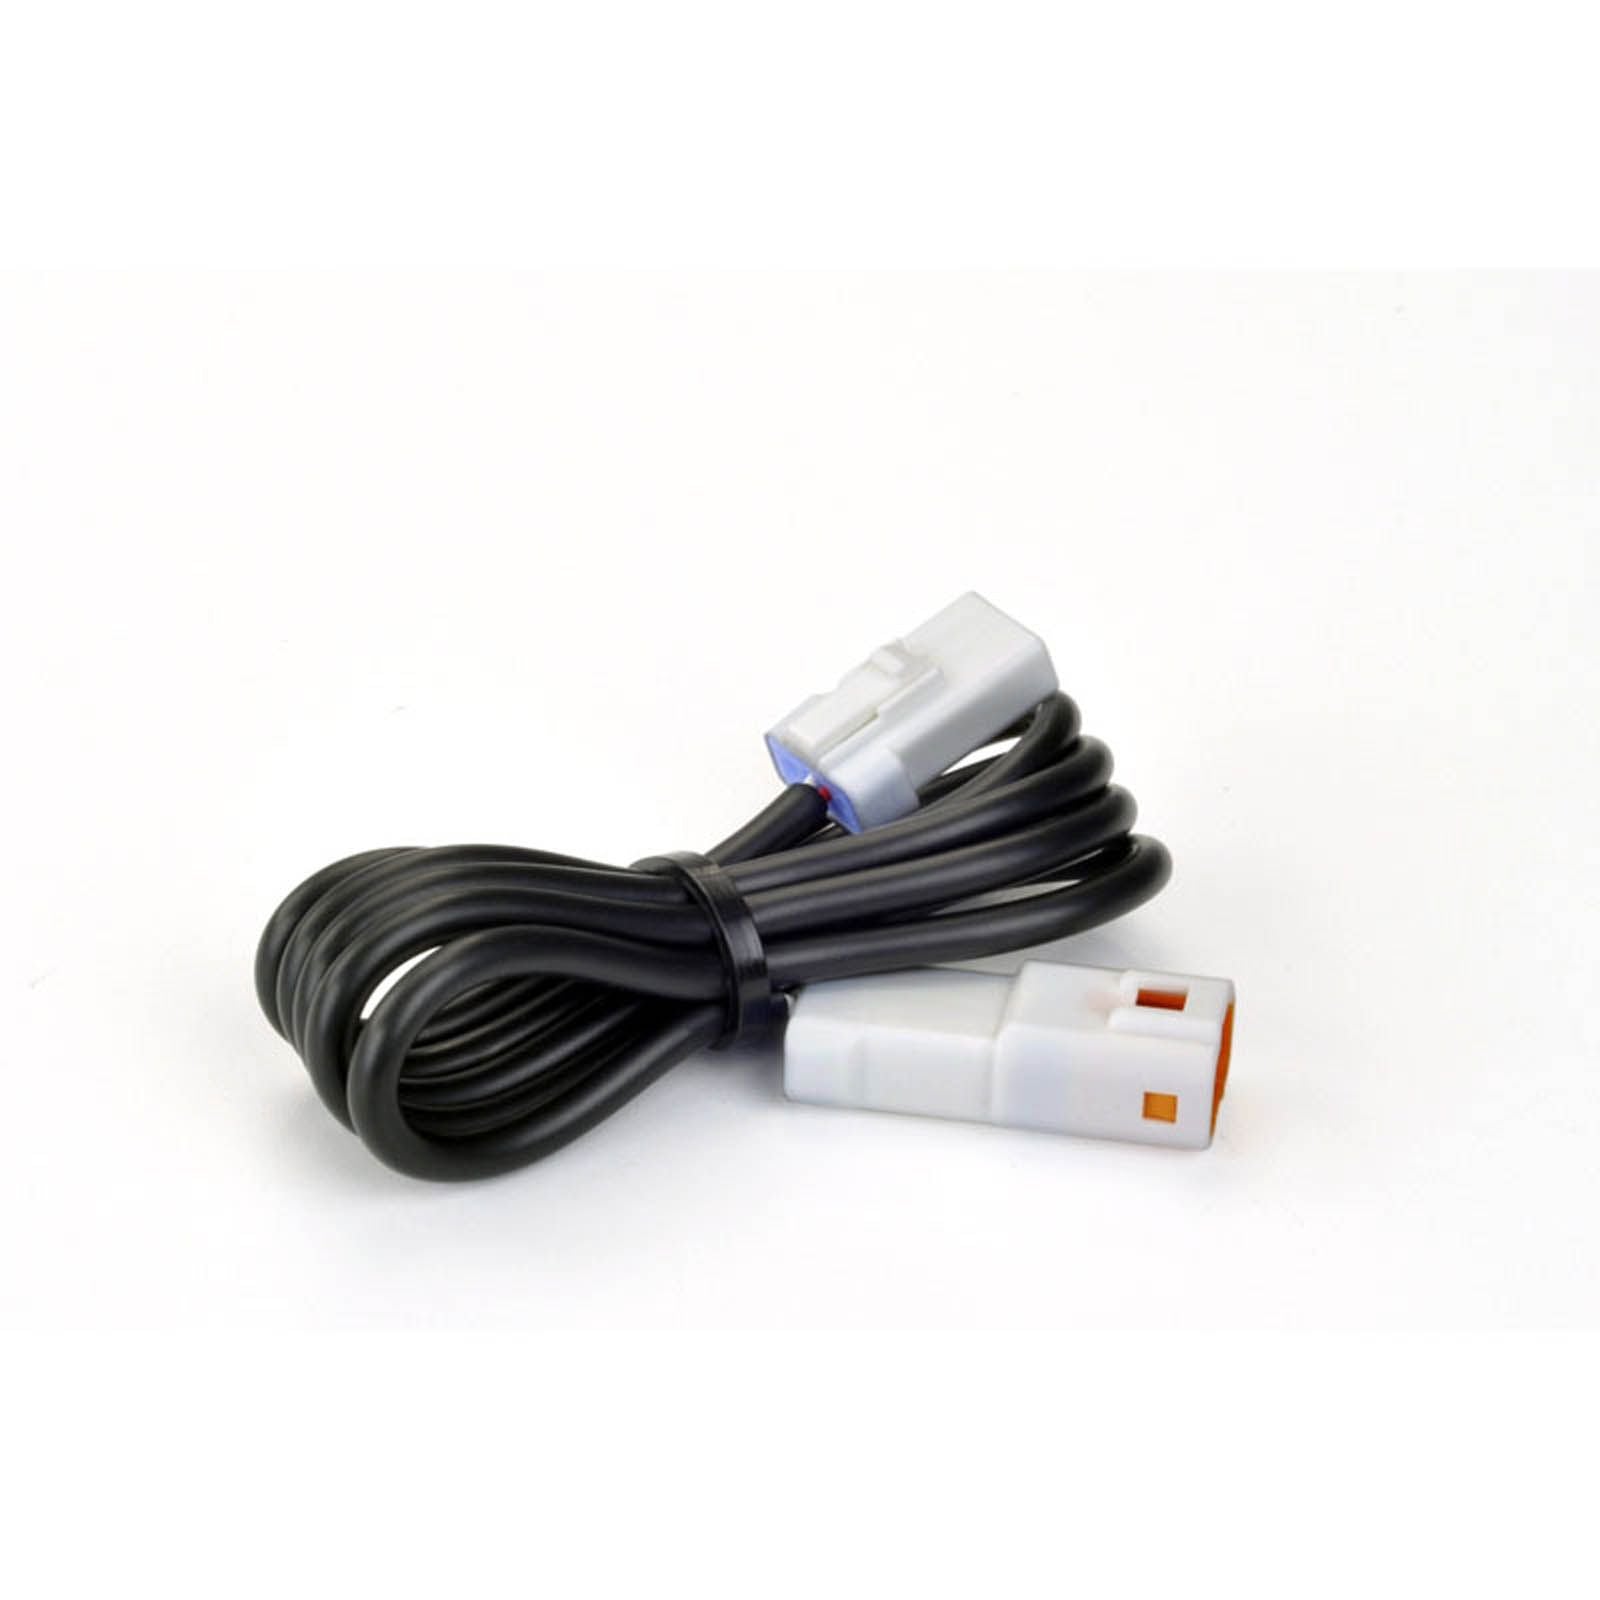 New TRAIL TECH Temperature Extension Lead 600mm/24